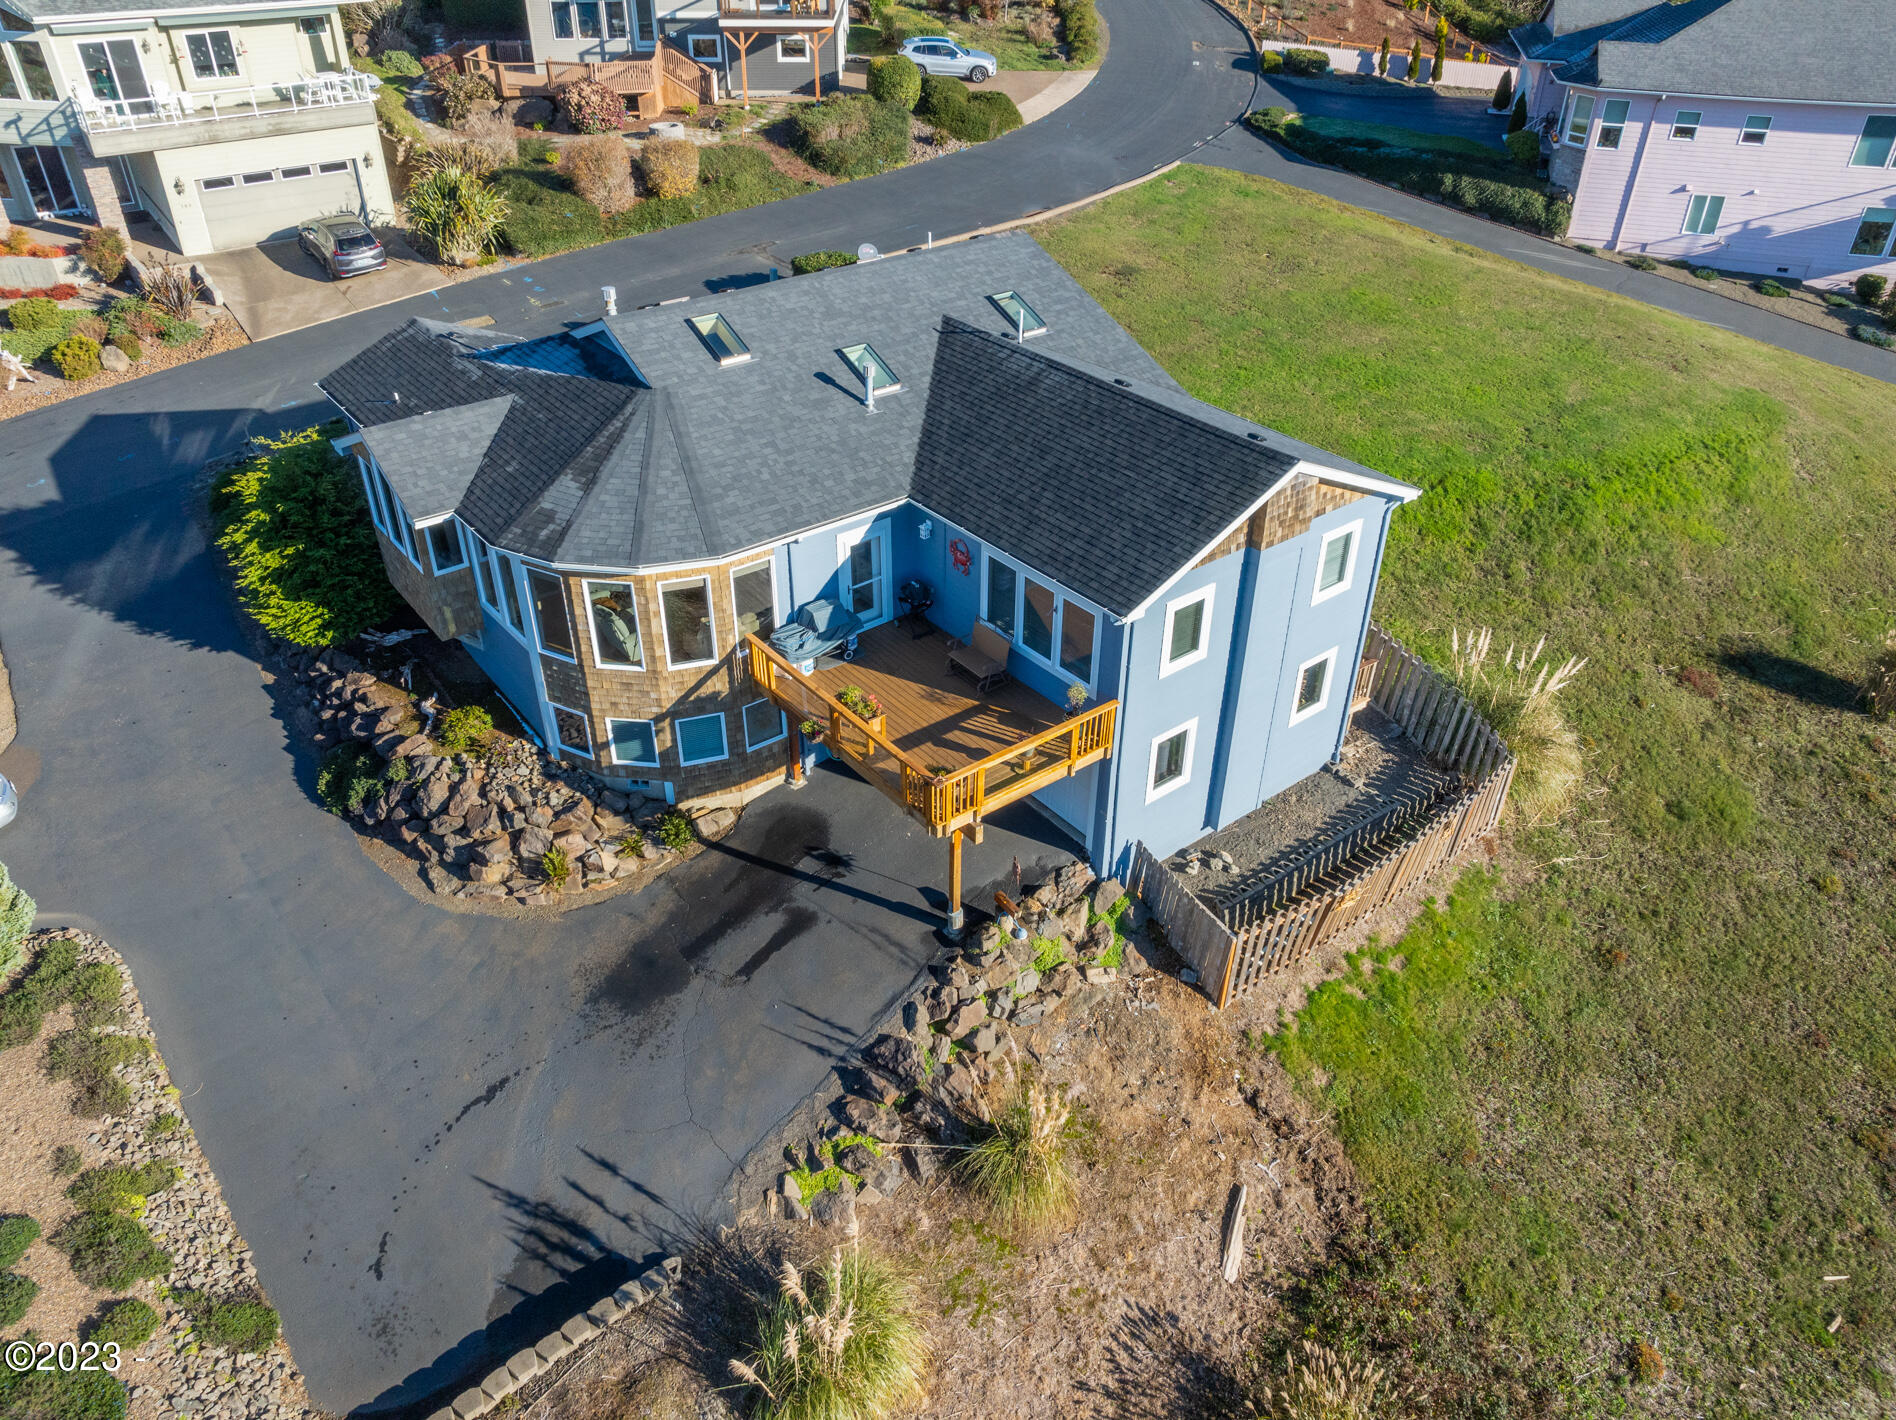 140 NE Spring Avenue Depoe Bay, Gleneden Beach, Lincoln City, Newport, Otis, Rose Lodge, Seal Rock, Waldport, Yachats, To Home Listings - Amy Plechaty, Emerald Coast Realty Real Estate, homes for sale, property for sale